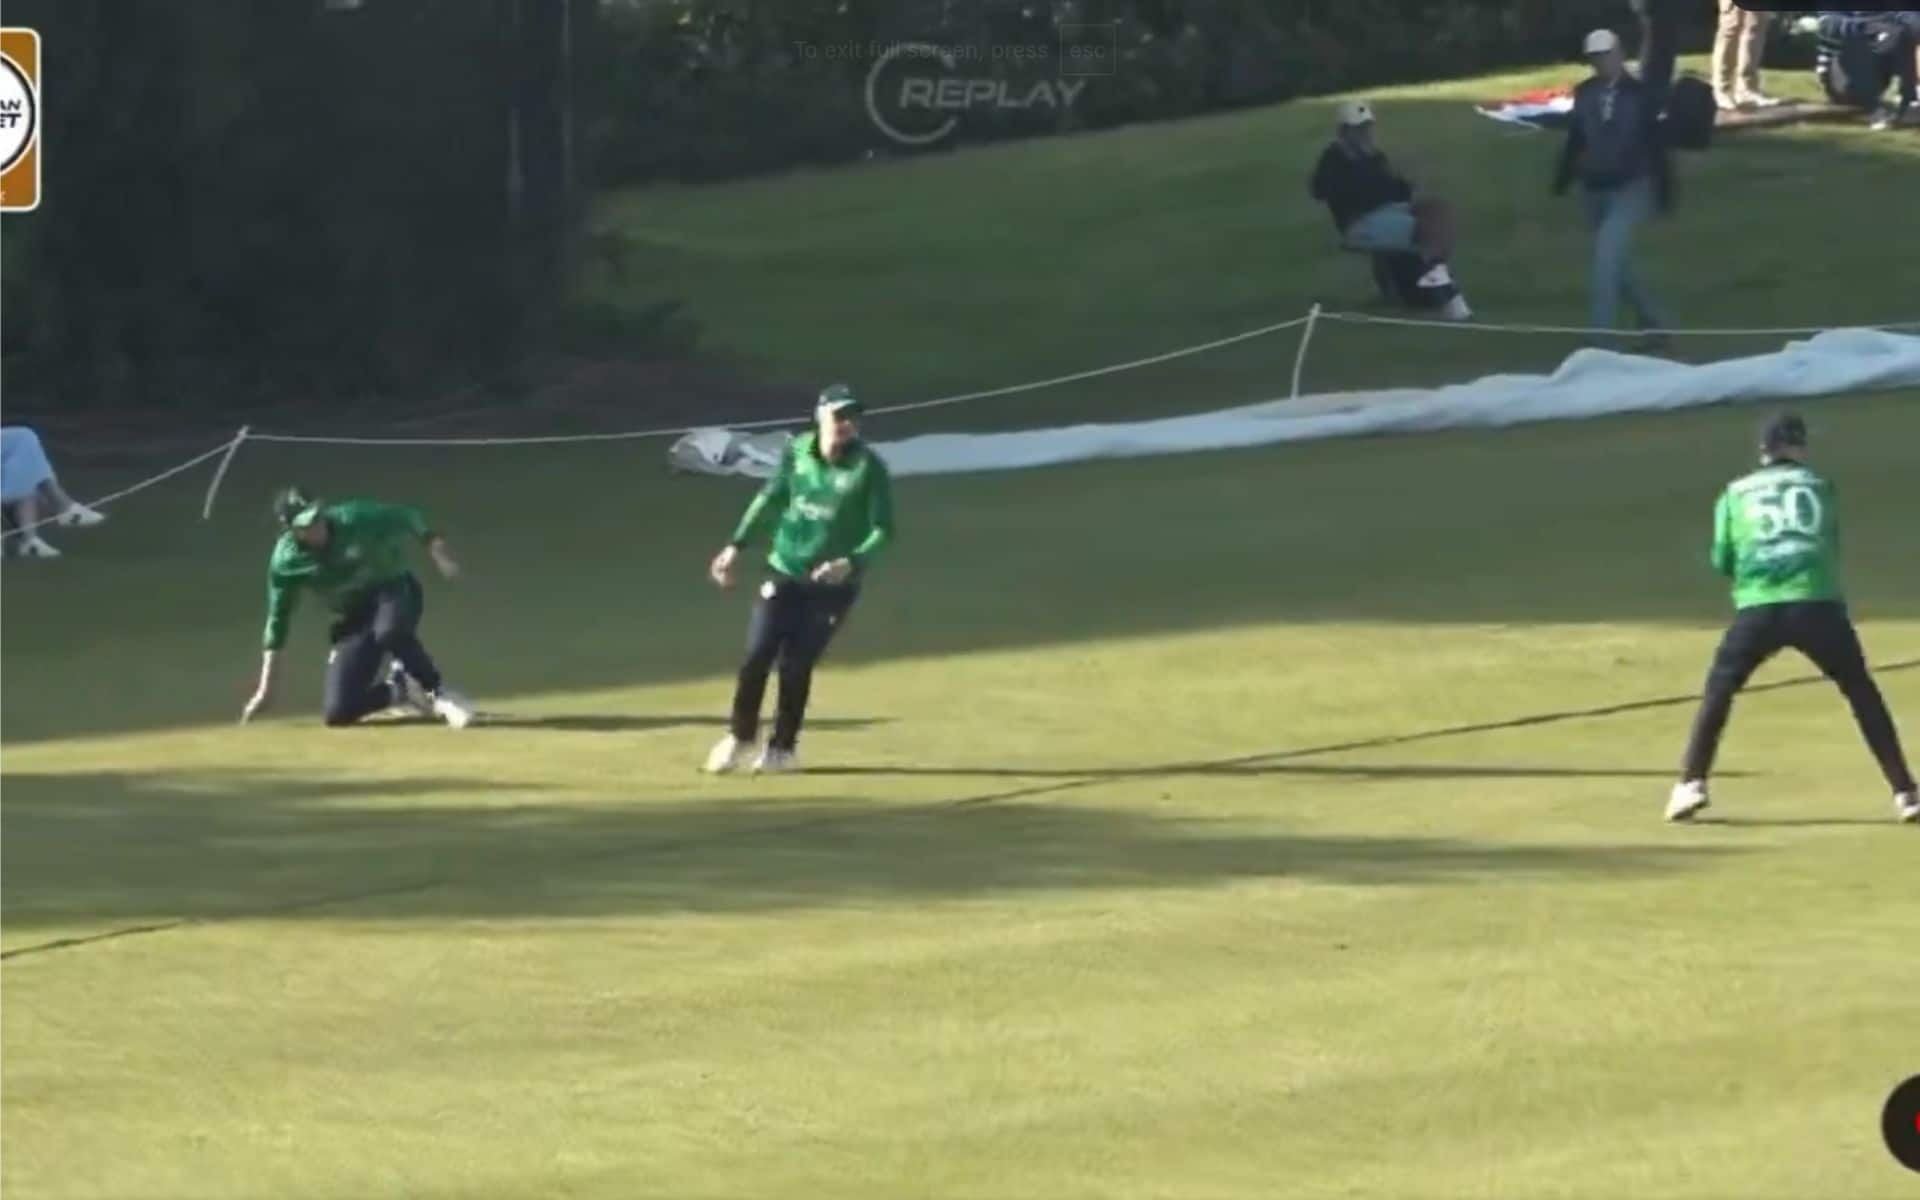 [Watch] Tector, Delany, Dockrell Save A Certain Boundary In A Never ...